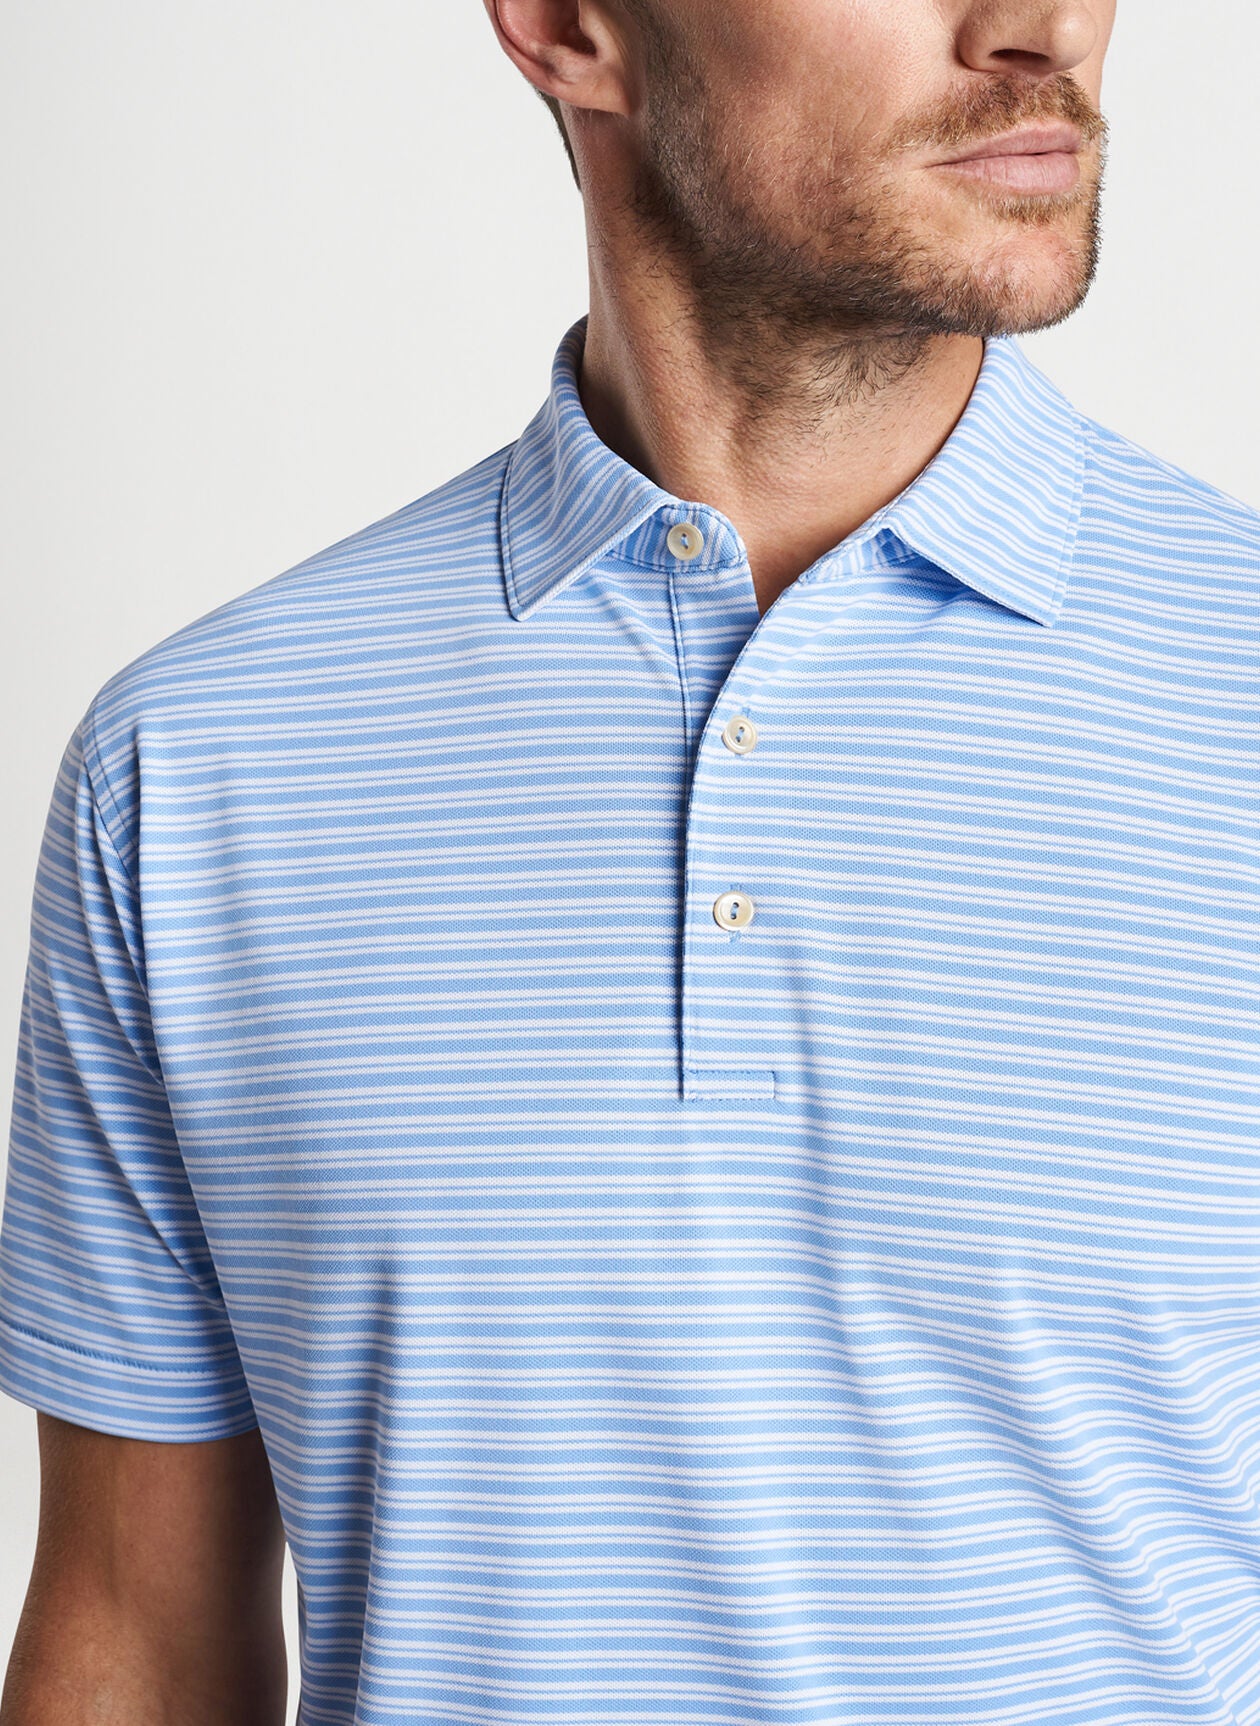 Dellroy Performance Mesh Polo - Cottage Blue